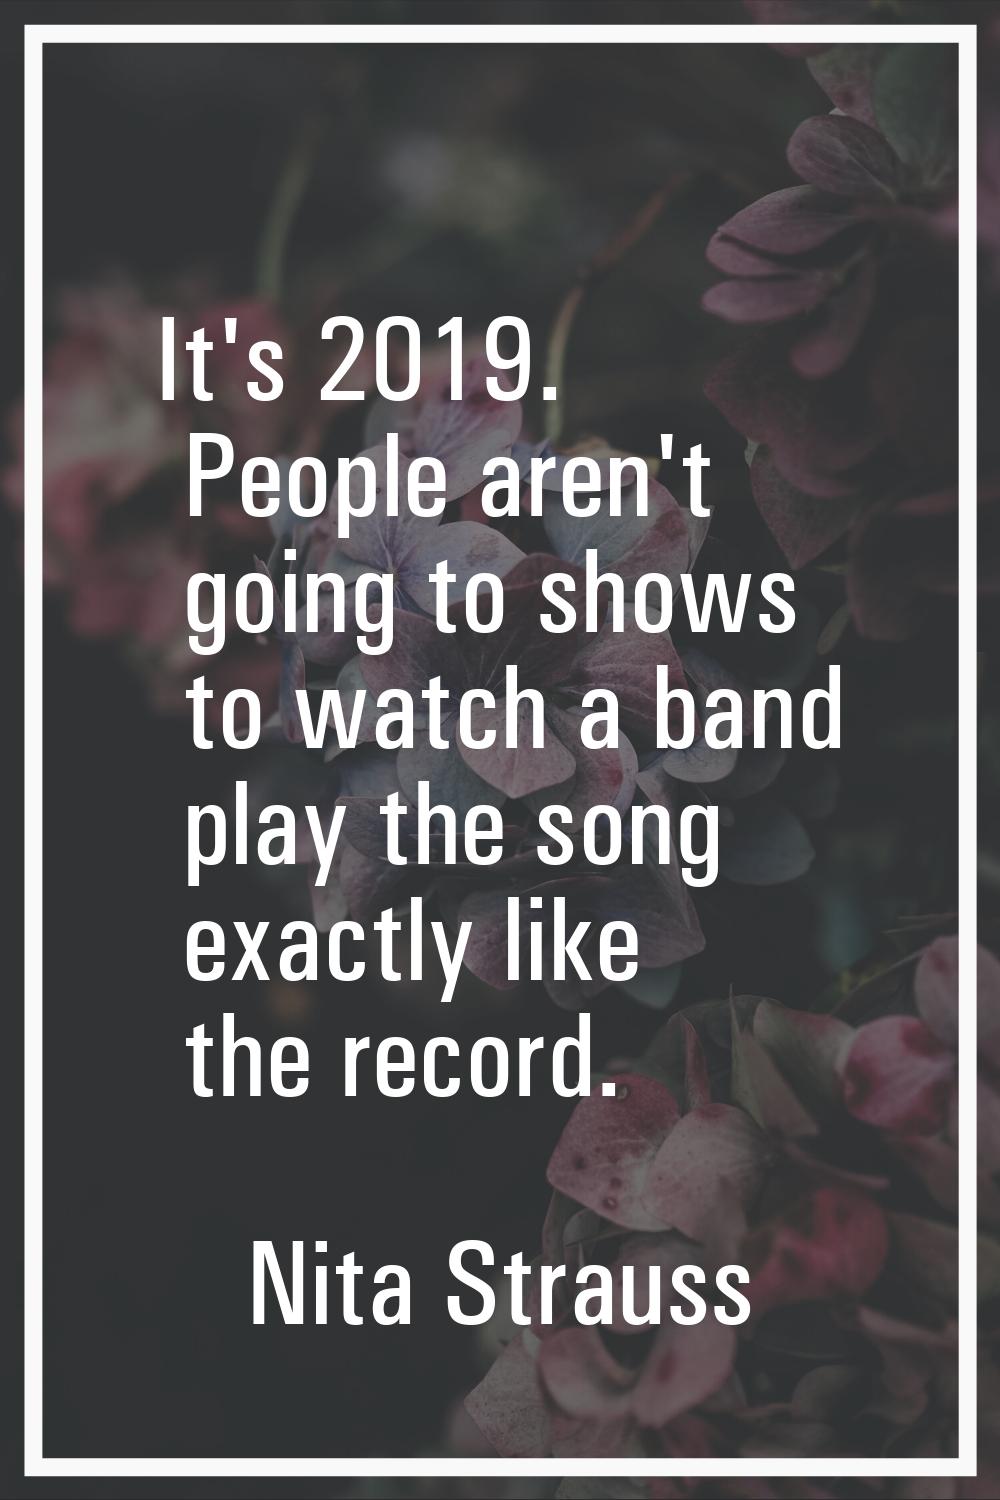 It's 2019. People aren't going to shows to watch a band play the song exactly like the record.